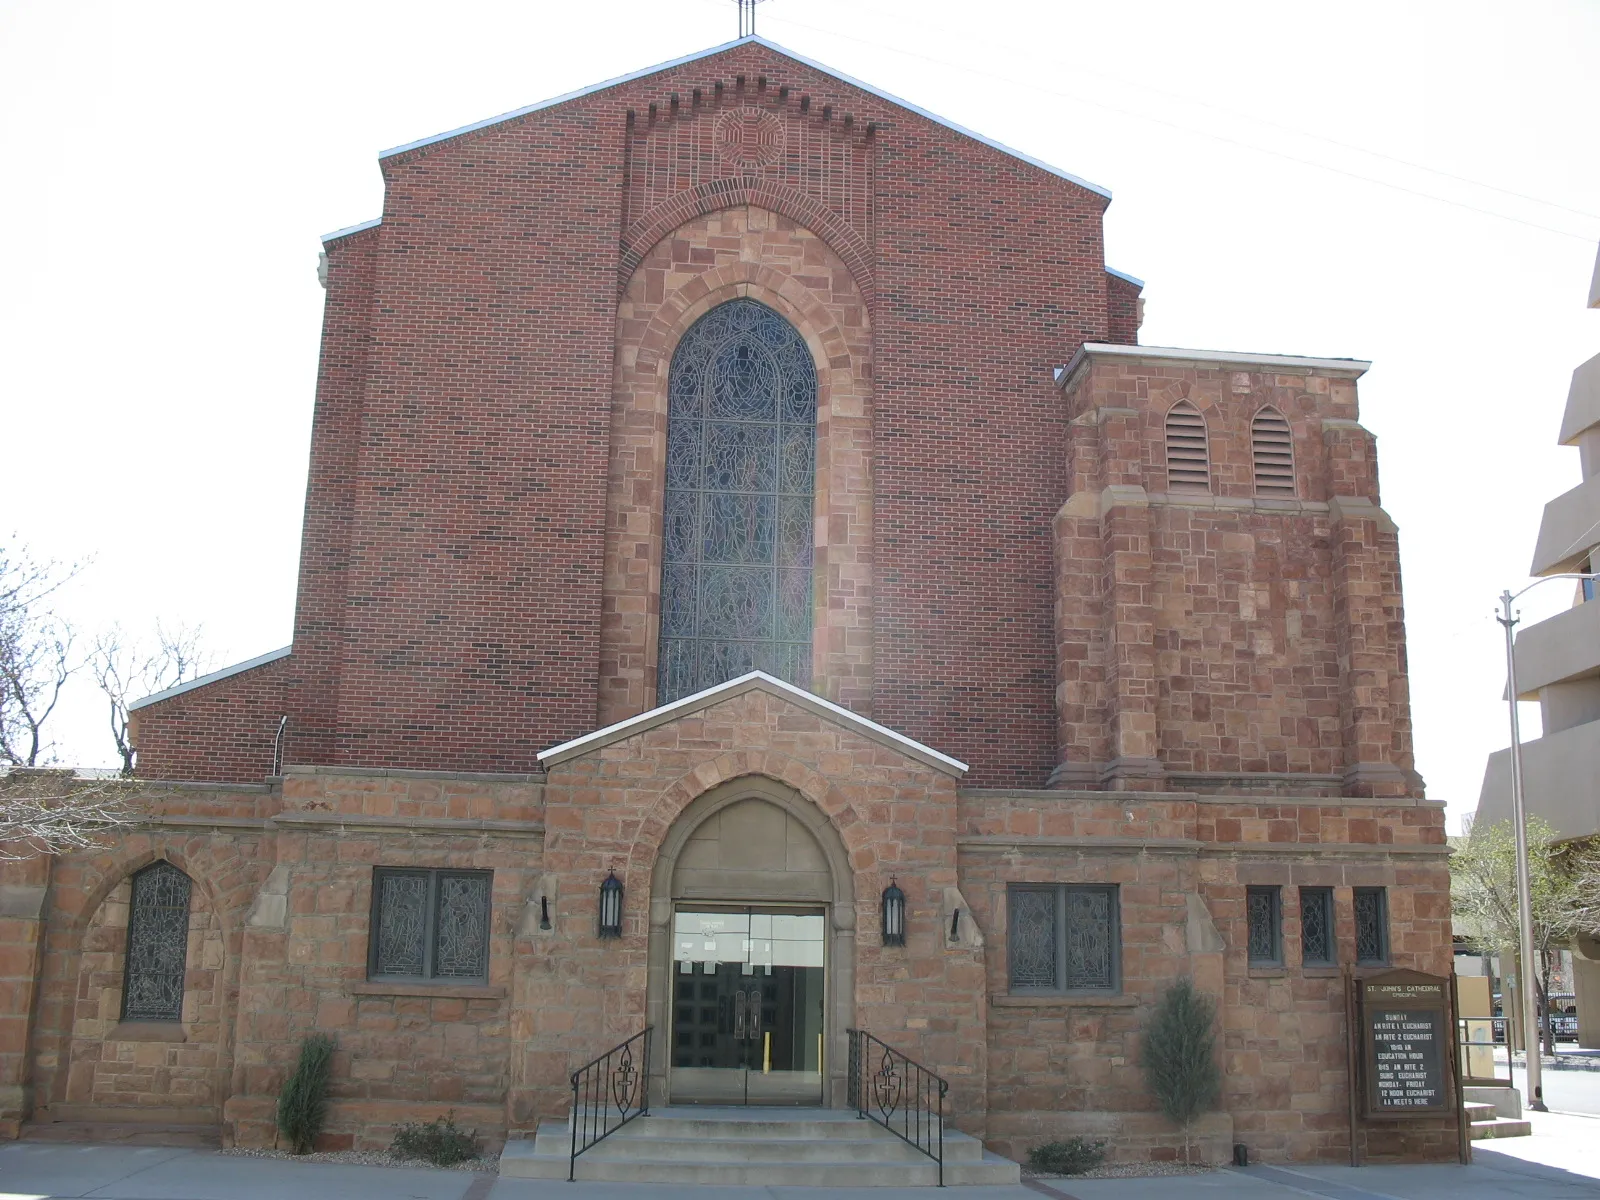 The Cathedral Church of St. John in Albuquerque, N.M., seat of the Episcopal Diocese of the Rio Grande, which hosted the attempted ordination of Anne Tropeano Oct. 16, 2021.?w=200&h=150